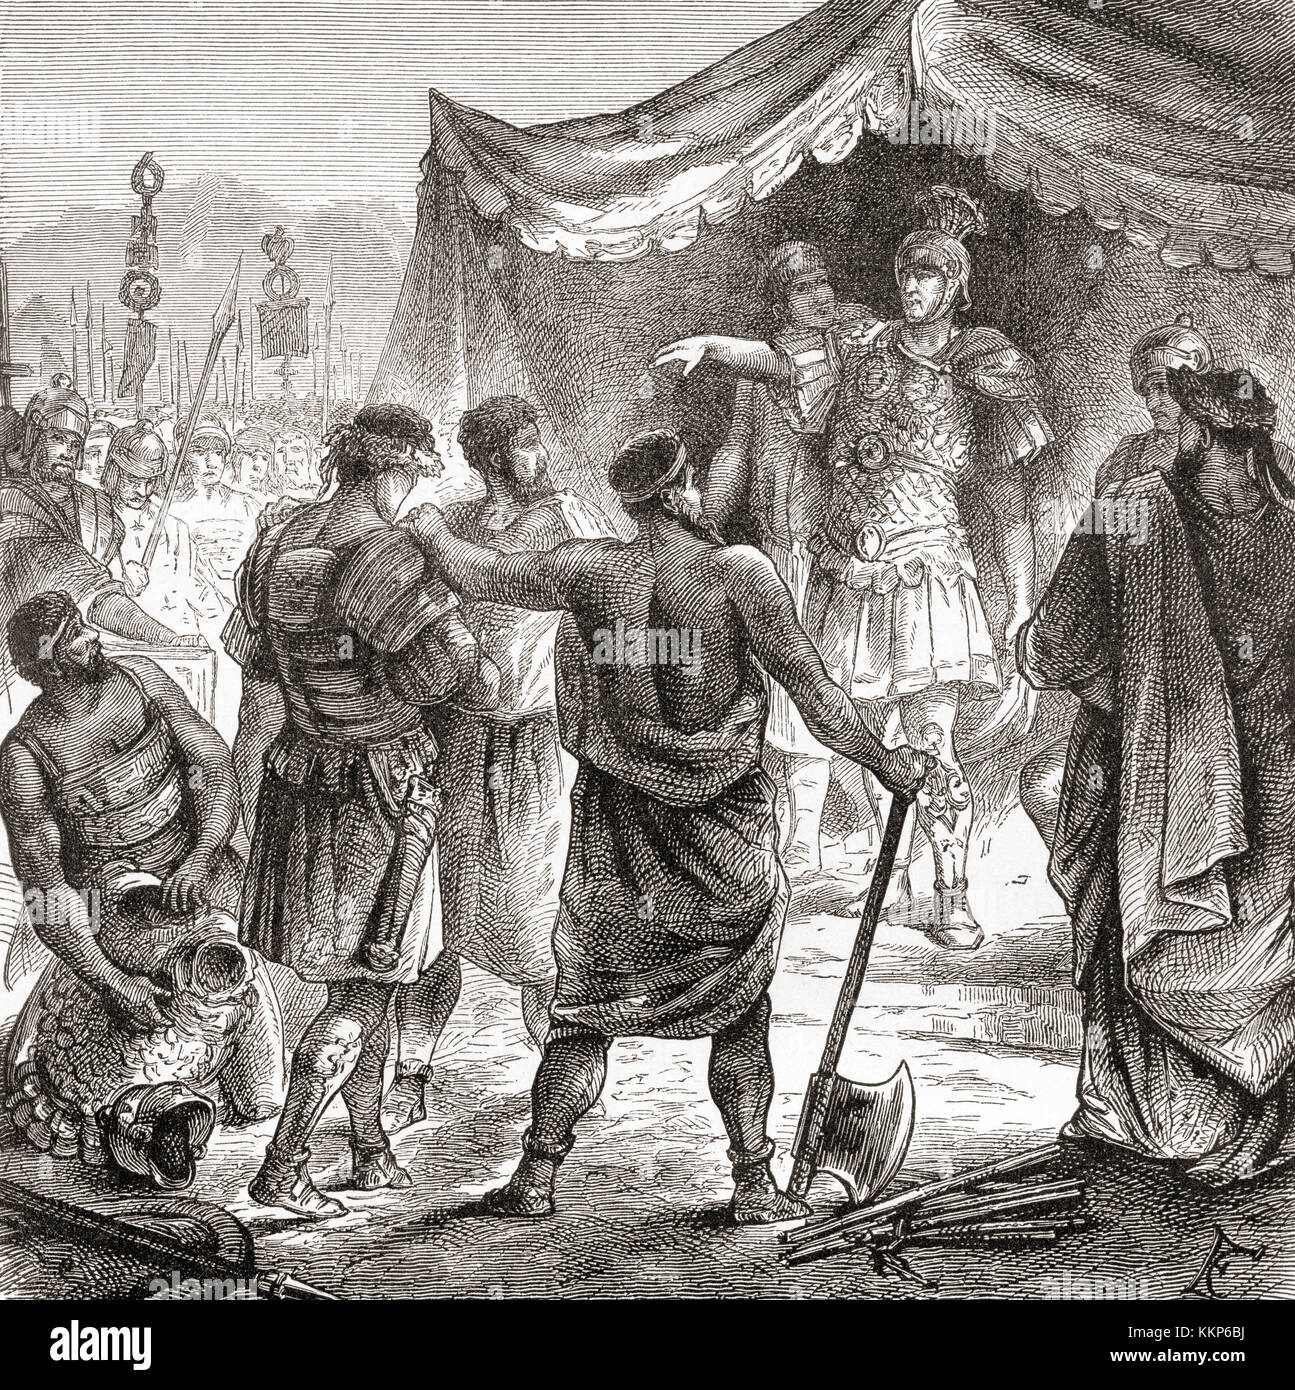 Roman consul Titus Manlius Torquatus condemning his son to death for leaving his post in battle. Titus Manlius Torquatus, Roman consul 347 BC.   From Ward and Lock's Illustrated History of the World, published c.1882. Stock Photo